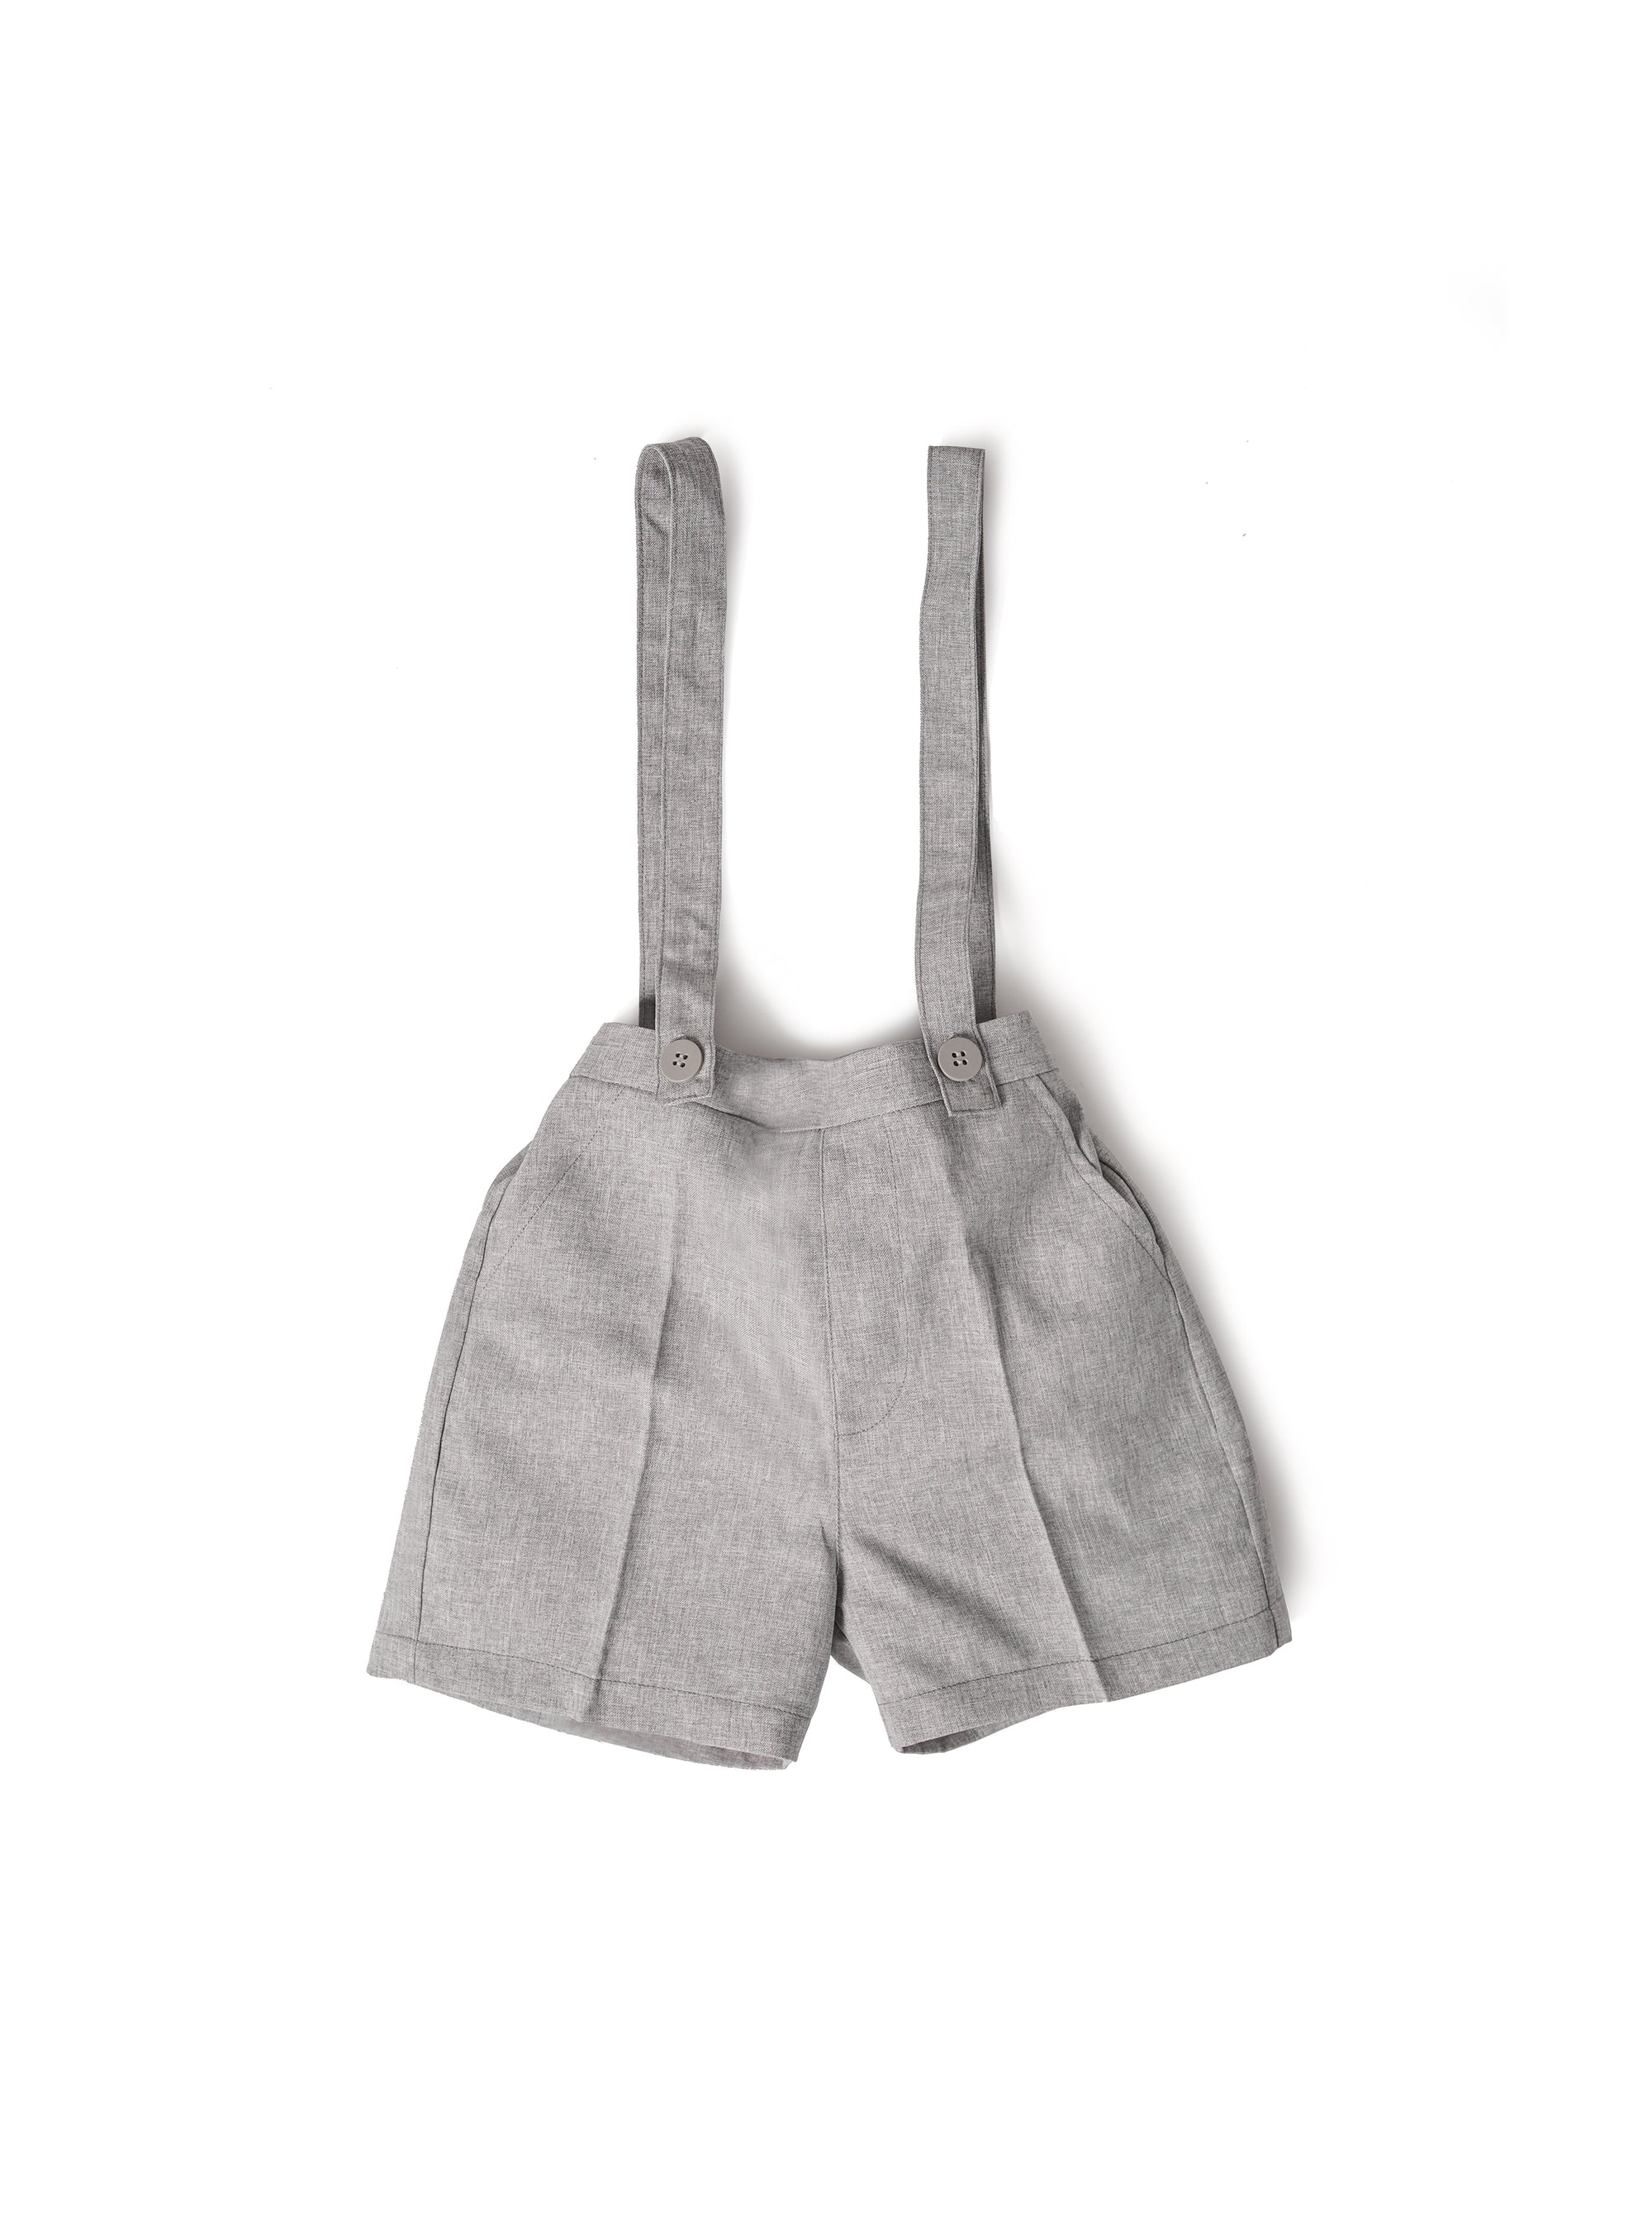 ghost gray overall with matching buttons